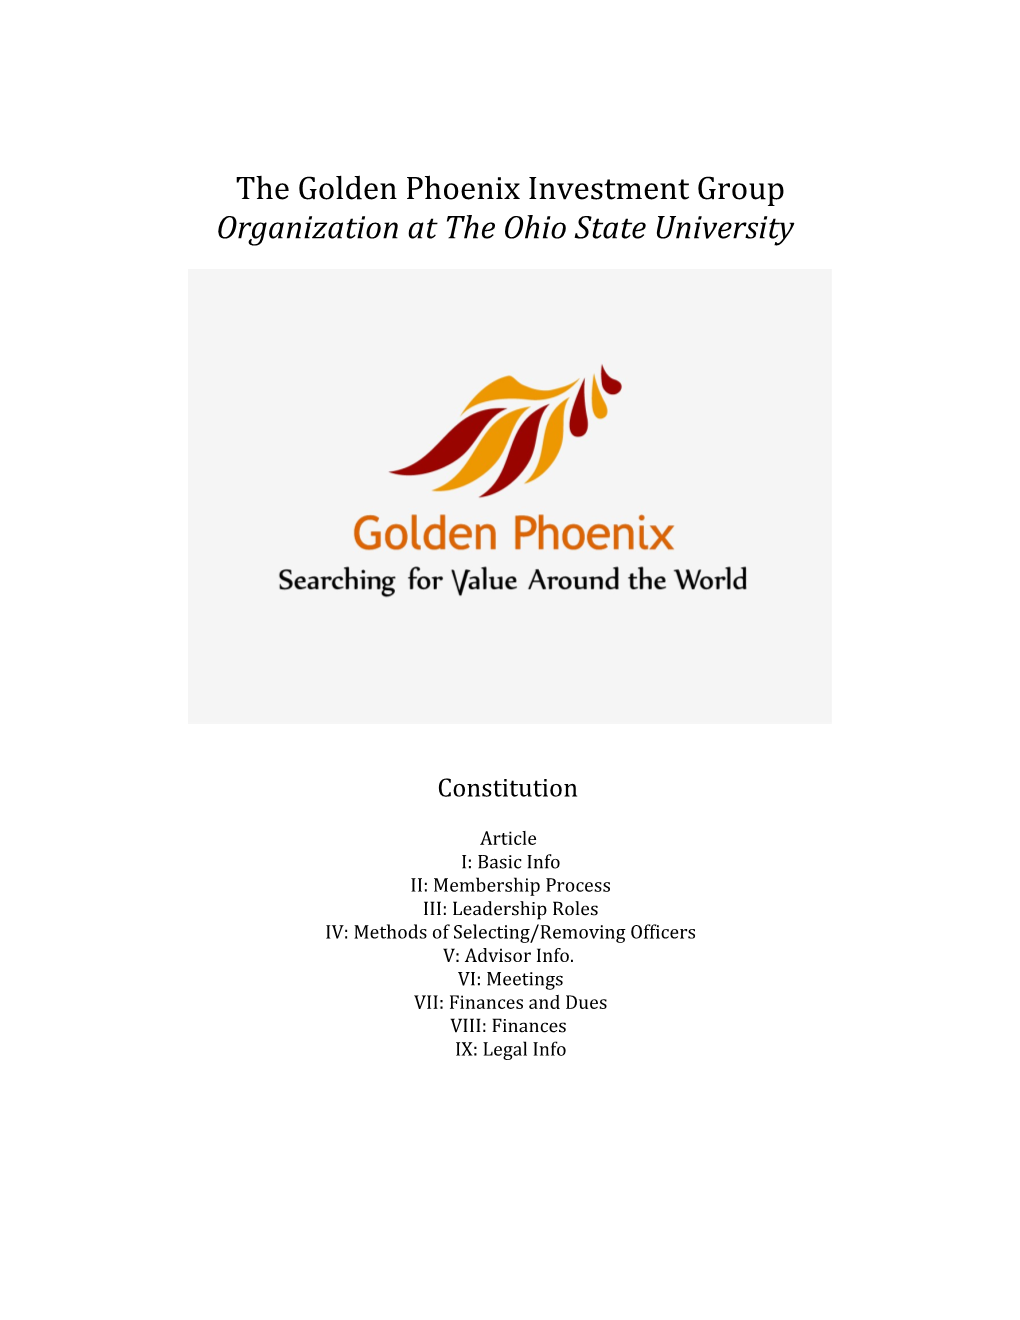 The Golden Phoenix Investment Group